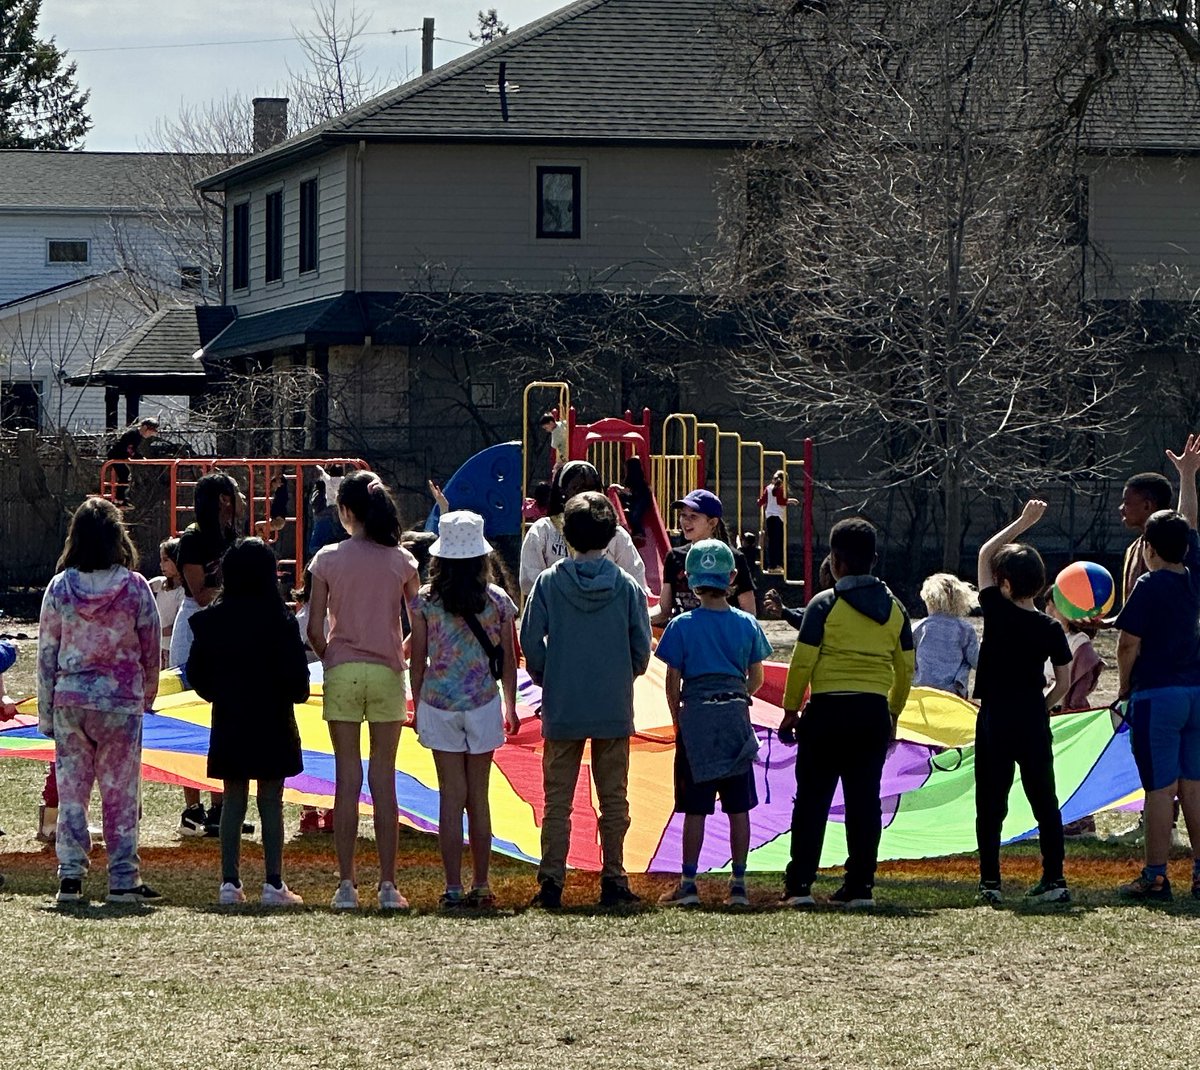 SGE Recess Project Spring edition: Releasing our energy with a parachute! @StGeorgeOCSB @StGeorgeCouncil #sgeRecess #ocsbOutdoors